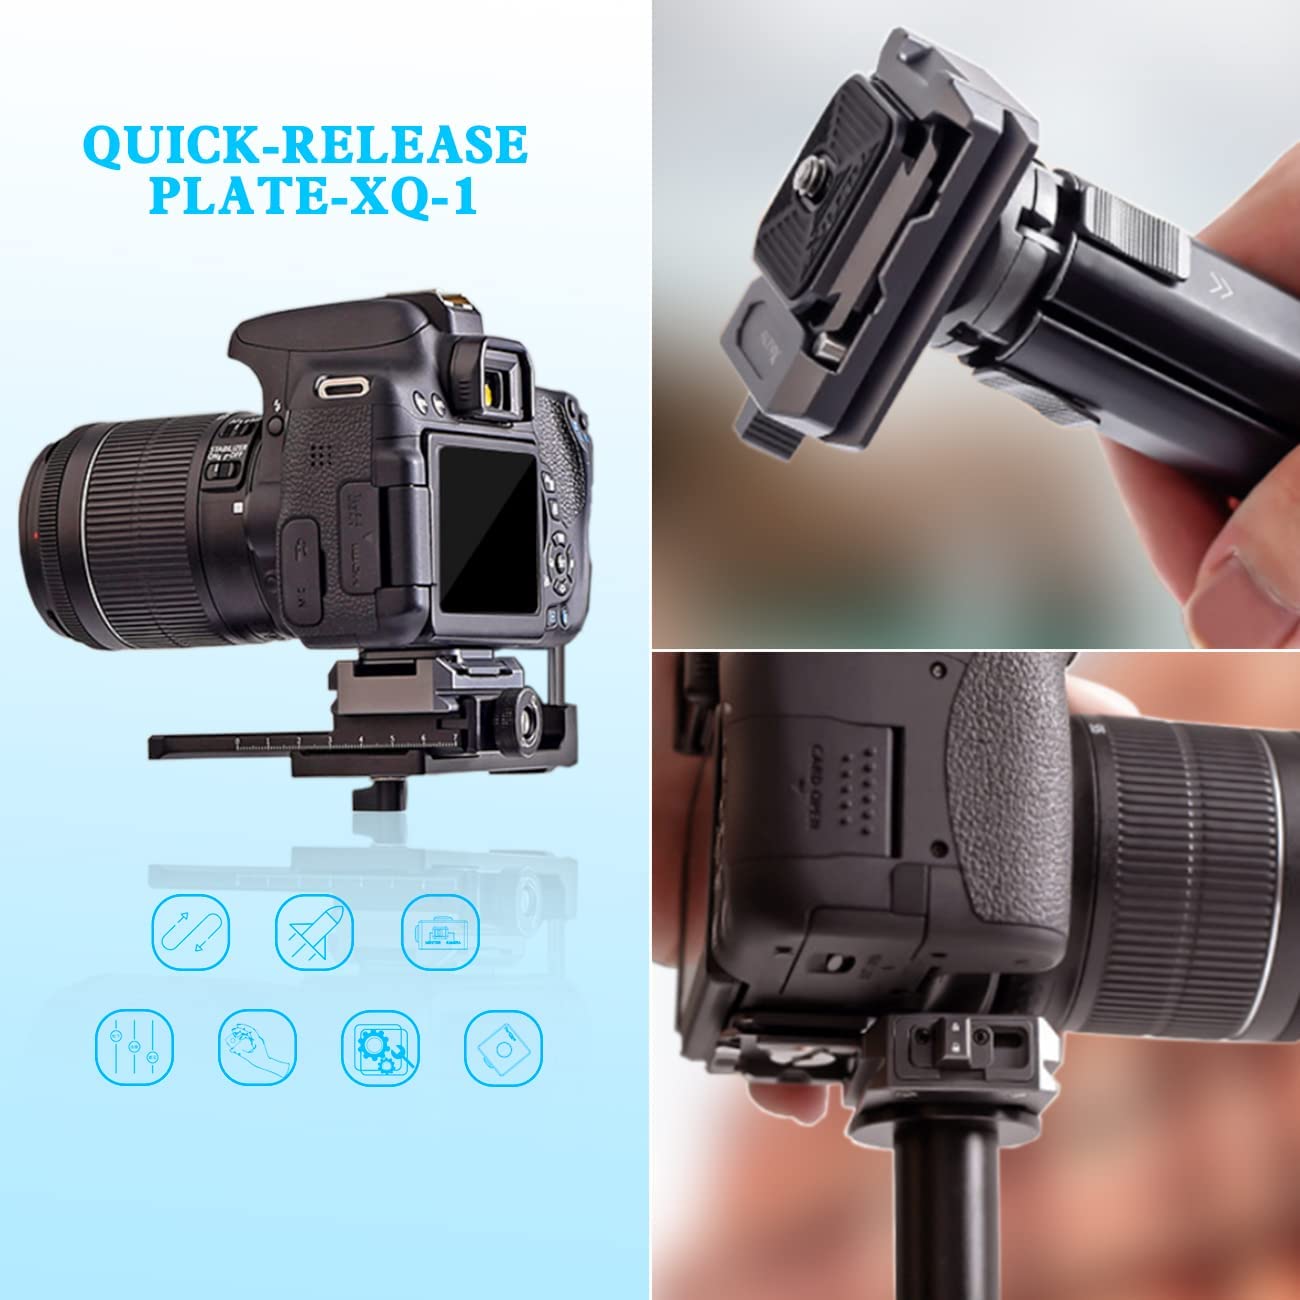 XQ-1 Quick Release Plate Adapter with Arcac-Swiss Interface and Two 1/4" Screw Quick Release Plate Fits for Tripods Monopods DSLR Stabilizer Slider